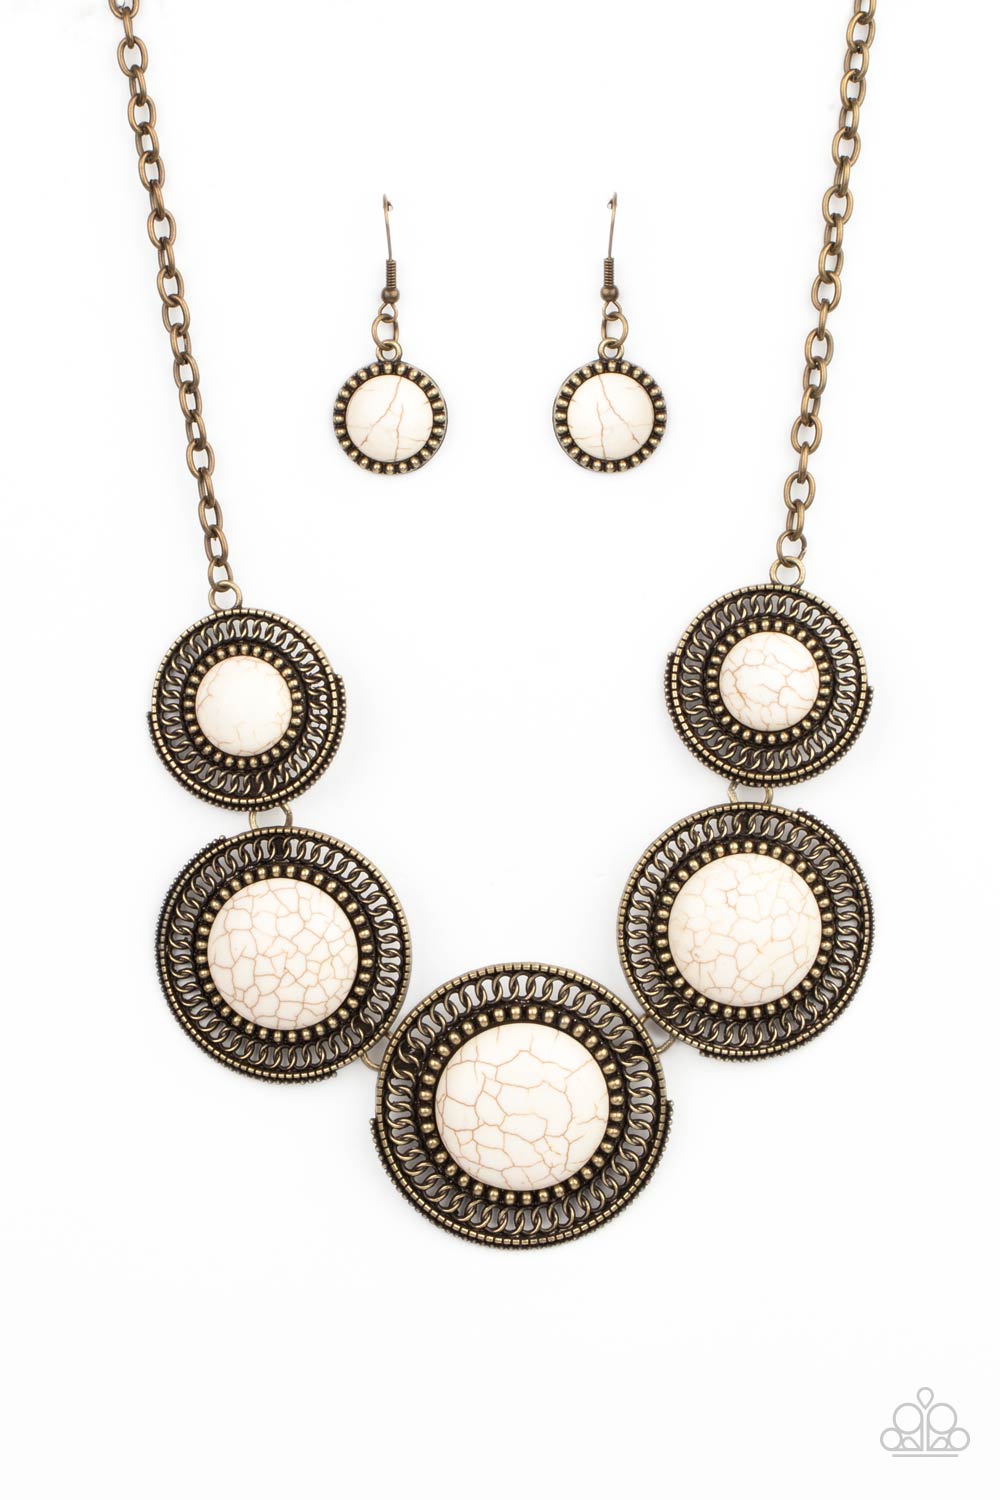 She Went West - Brass and White Stone Necklace - Paparazzi Accessories - Earthy white stones, pressed into round antiqued brass frames featuring dot and interlinking loop motifs, create a dramatically rustic statement as they link across the collar. Features an adjustable clasp closure.